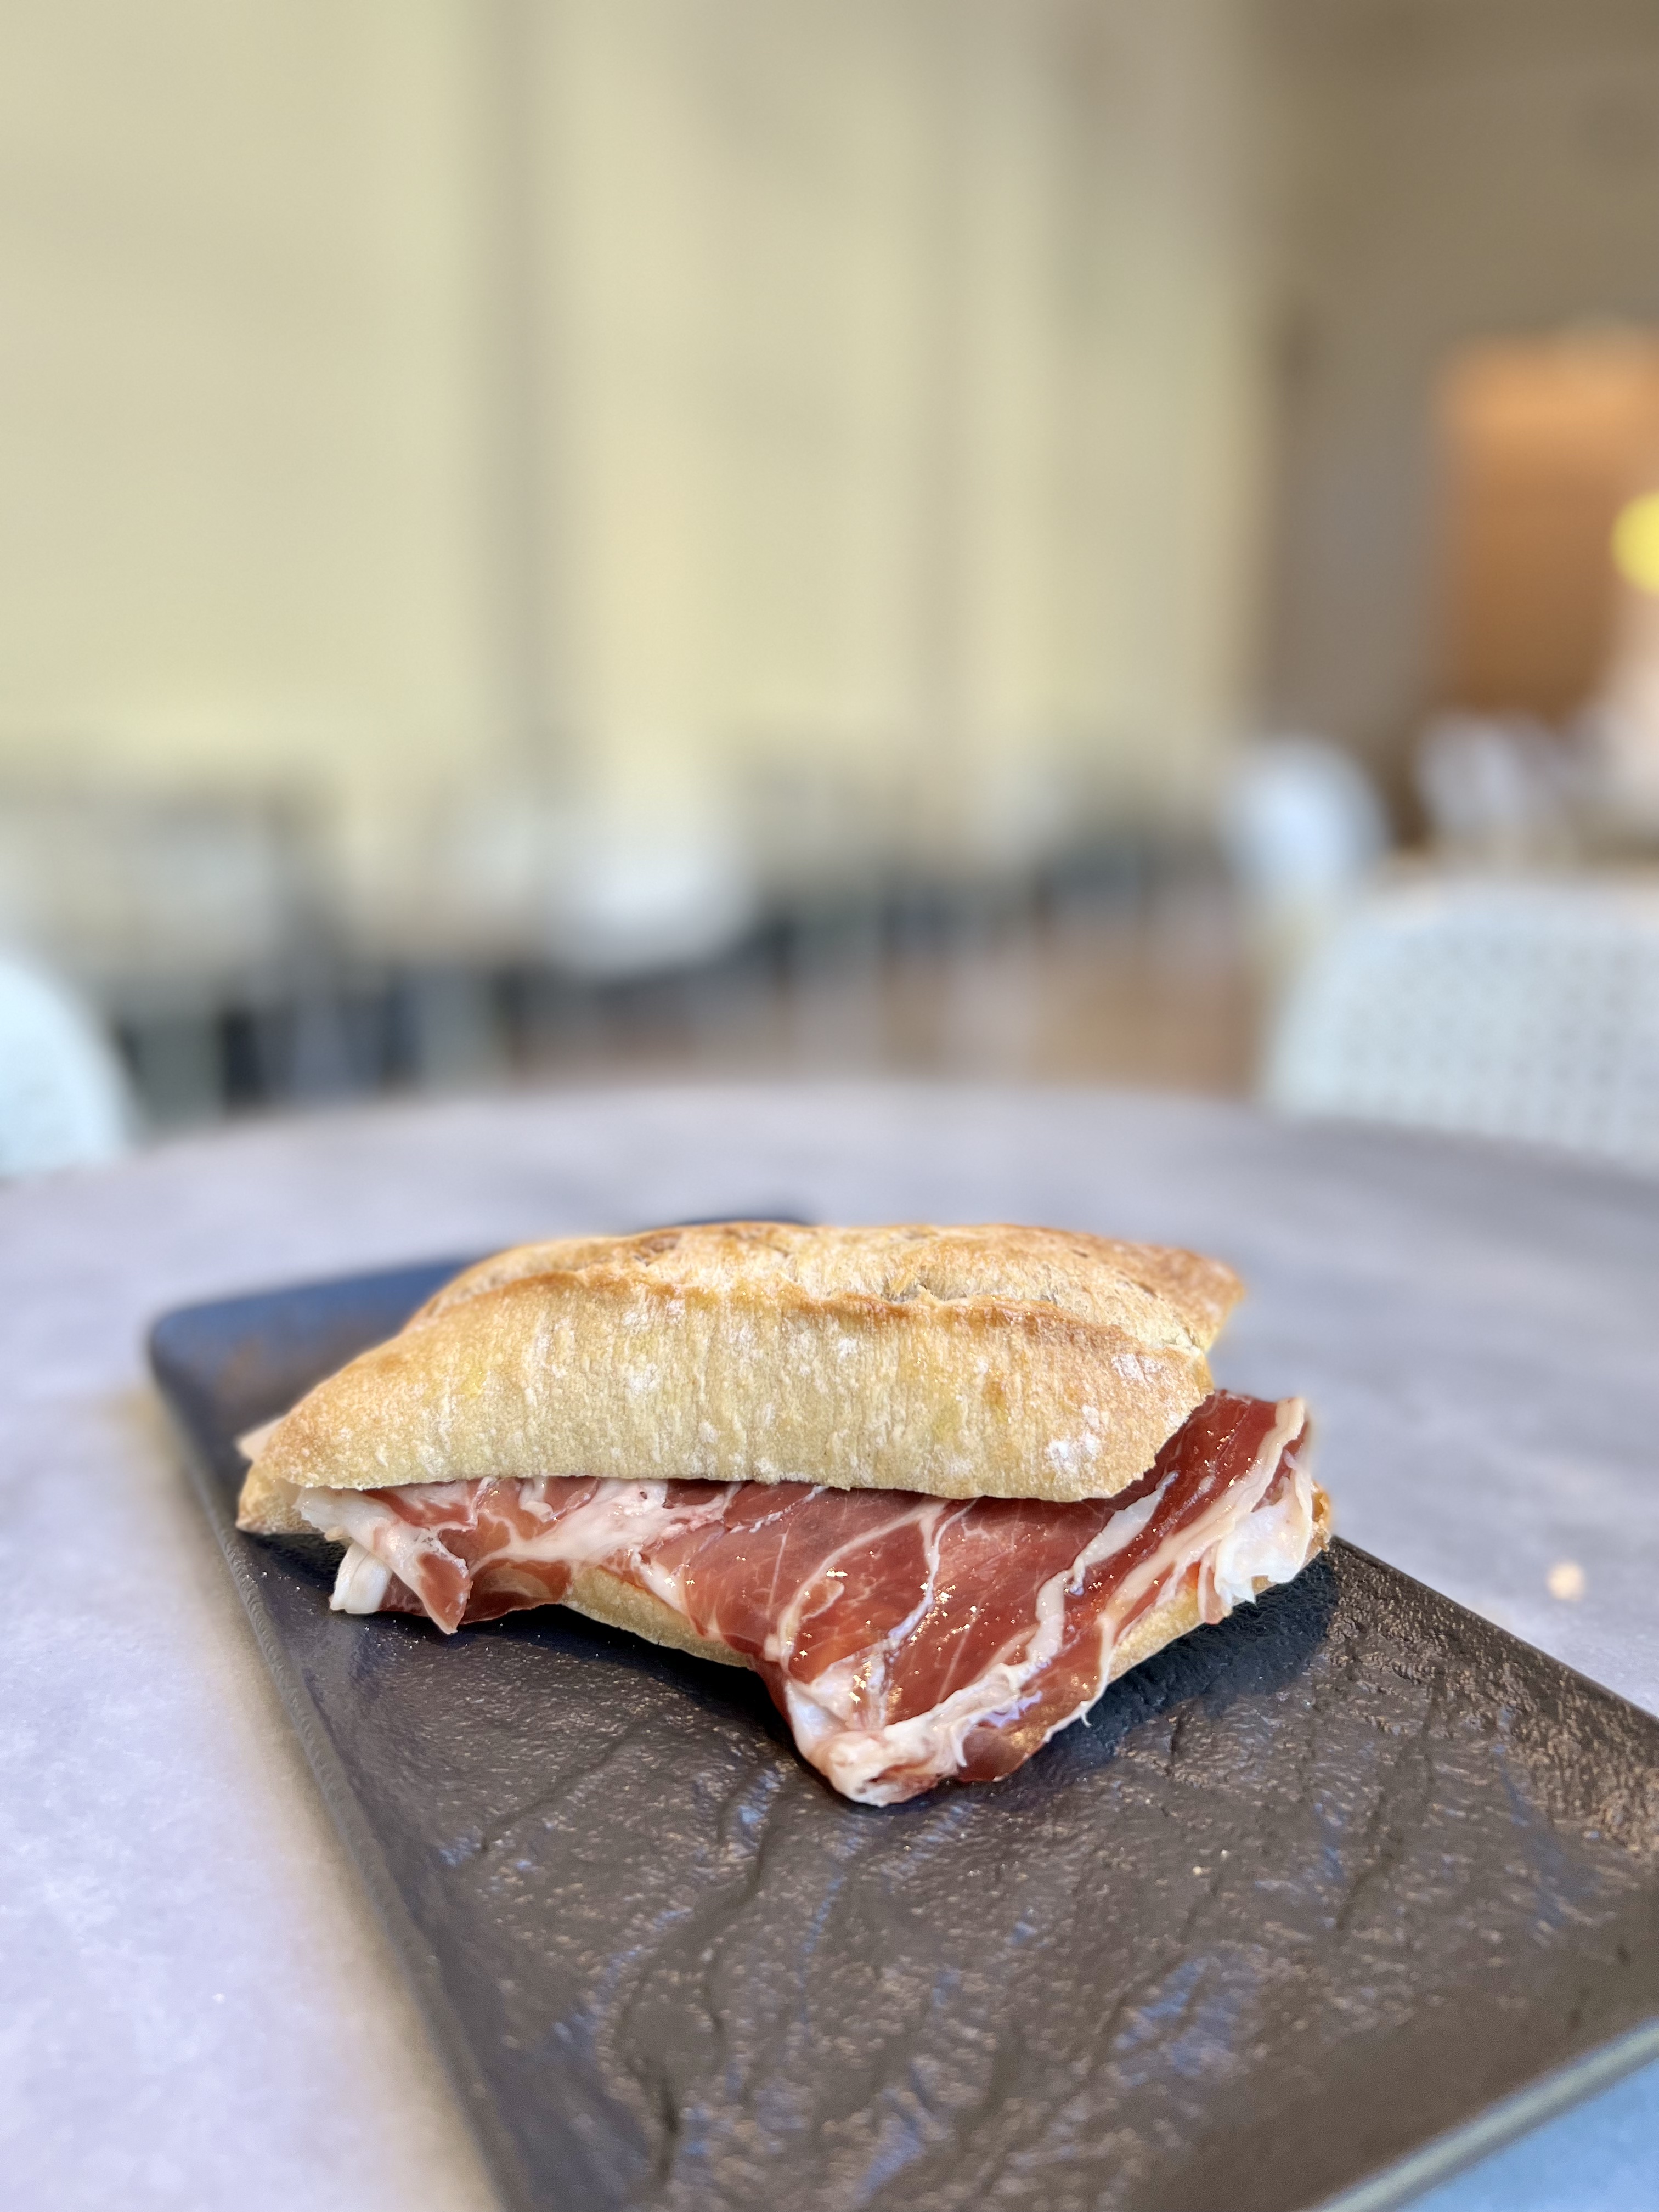 Toasted bar of Iberian ham, tomato and extra virgin olive oil